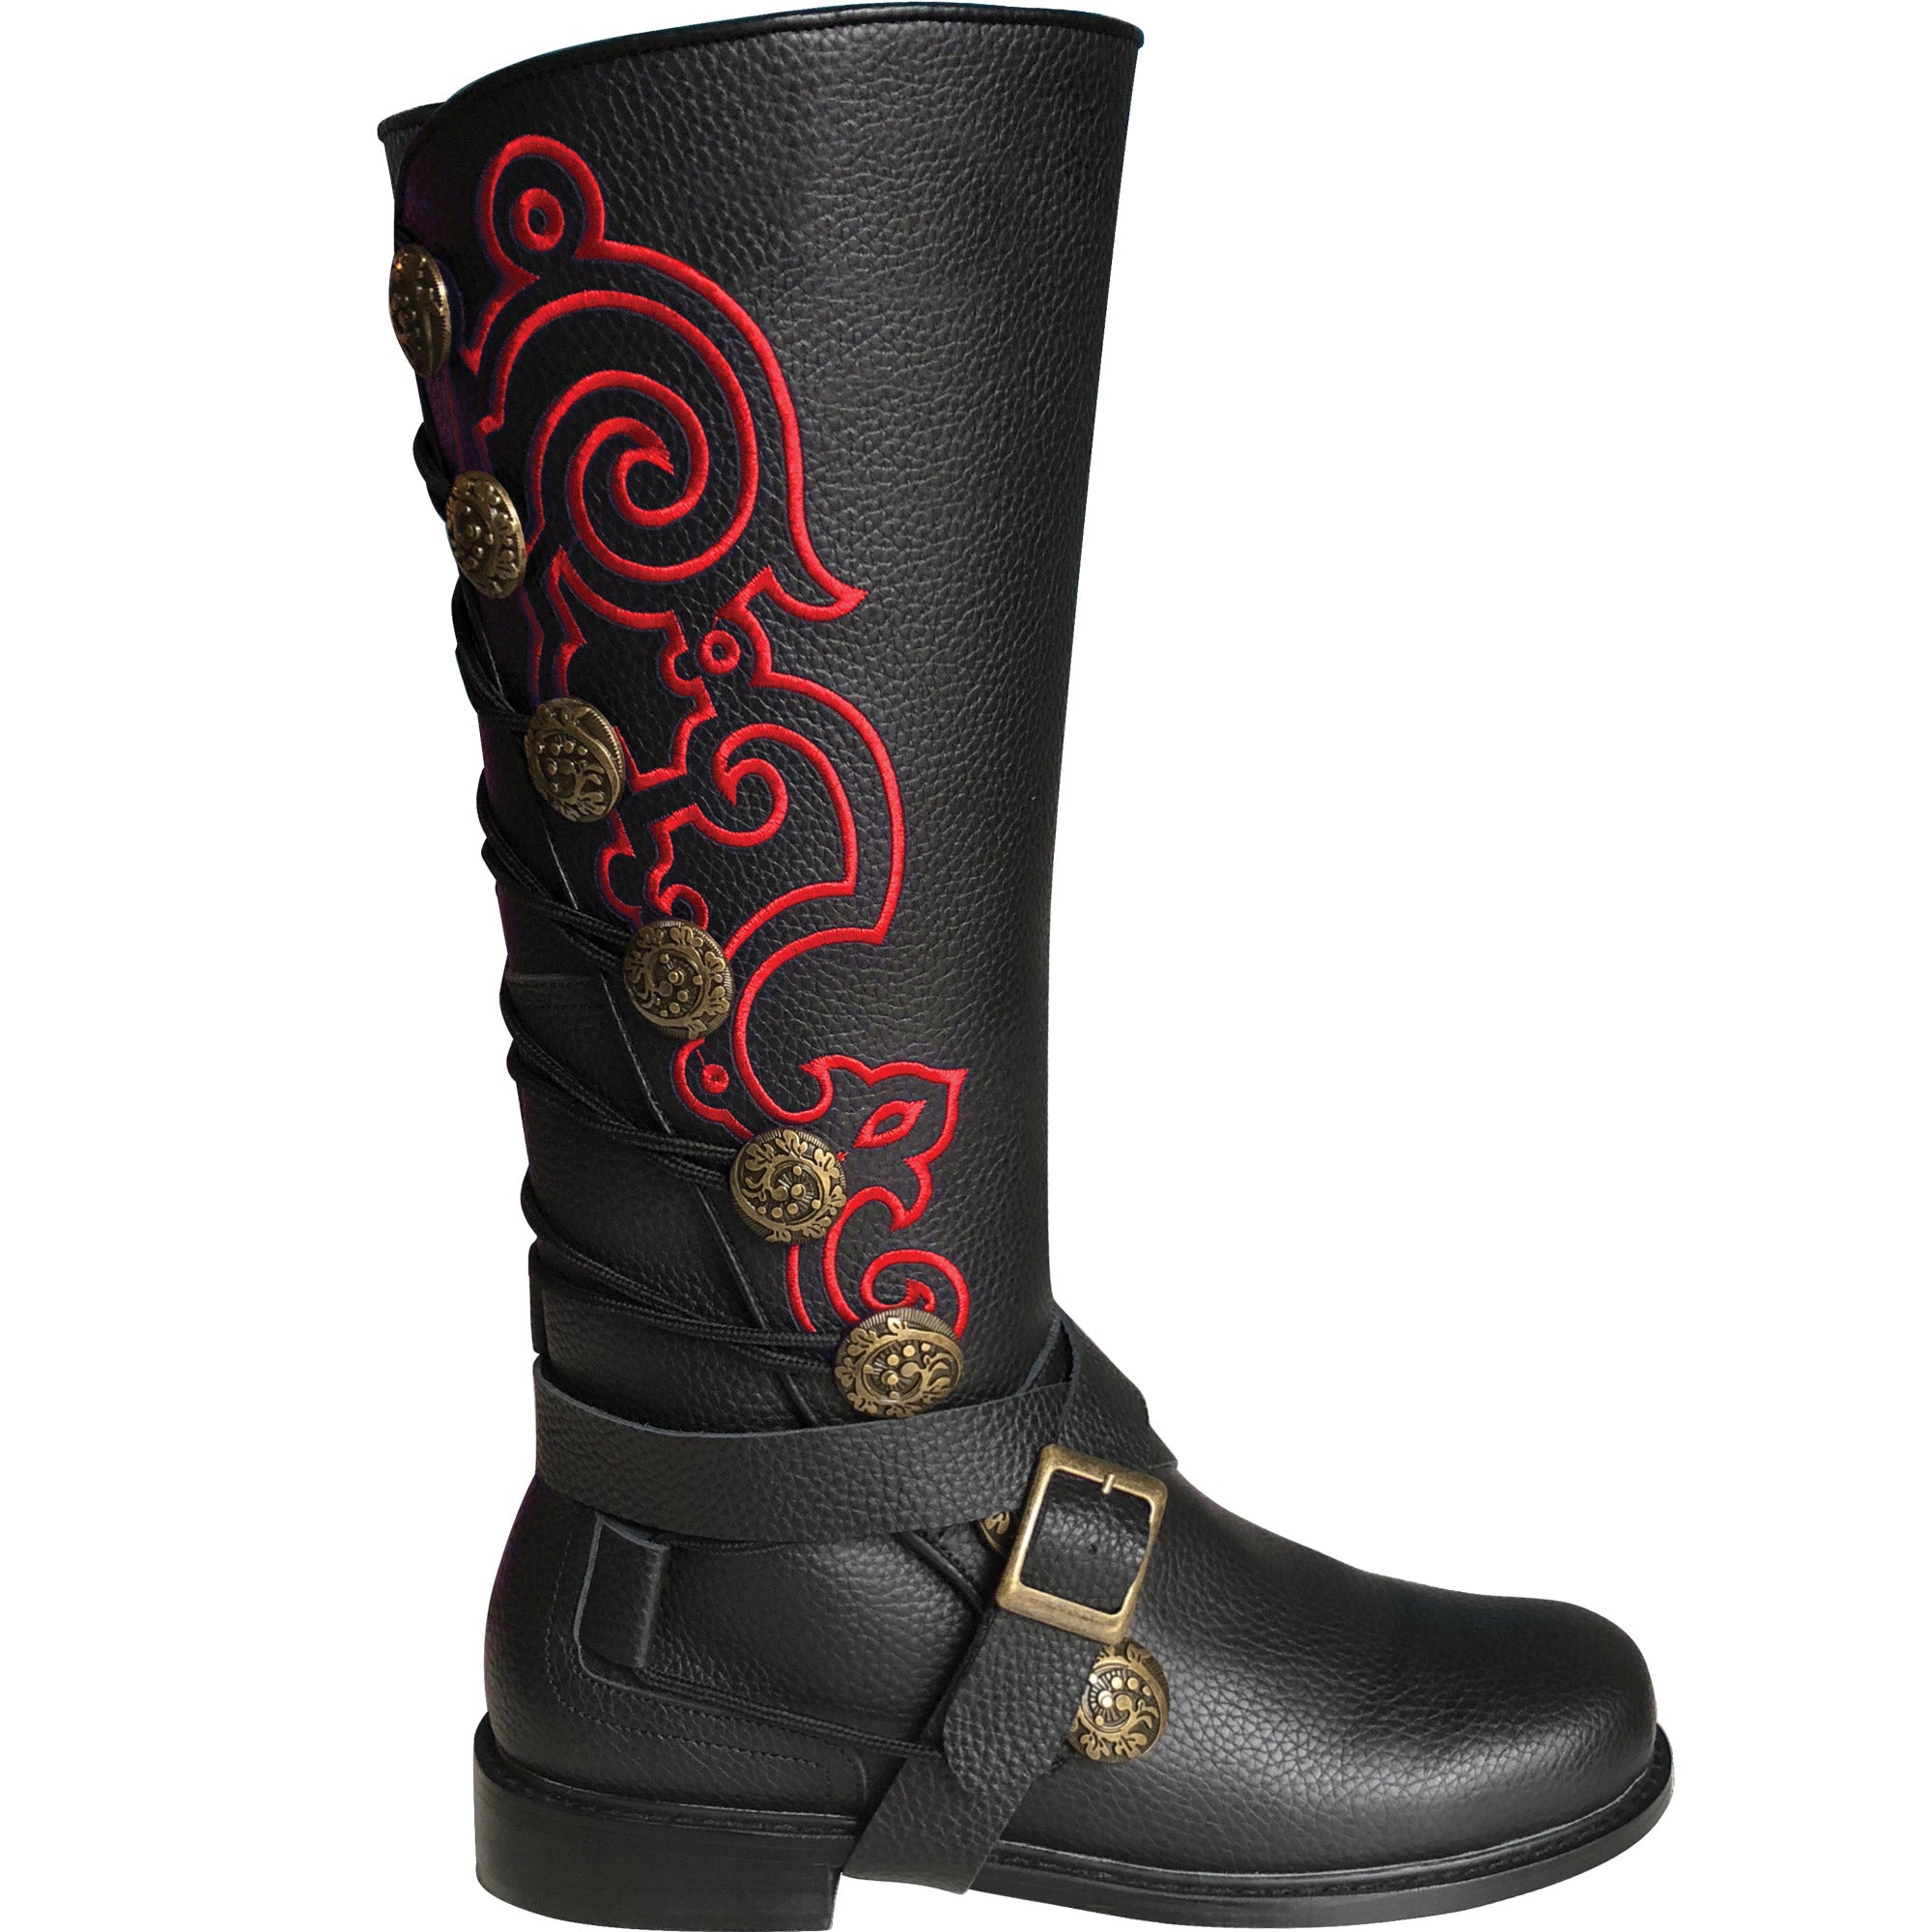 Men’s Black Leather Nobleman's Boots with Red Embroidery and Removable Straps